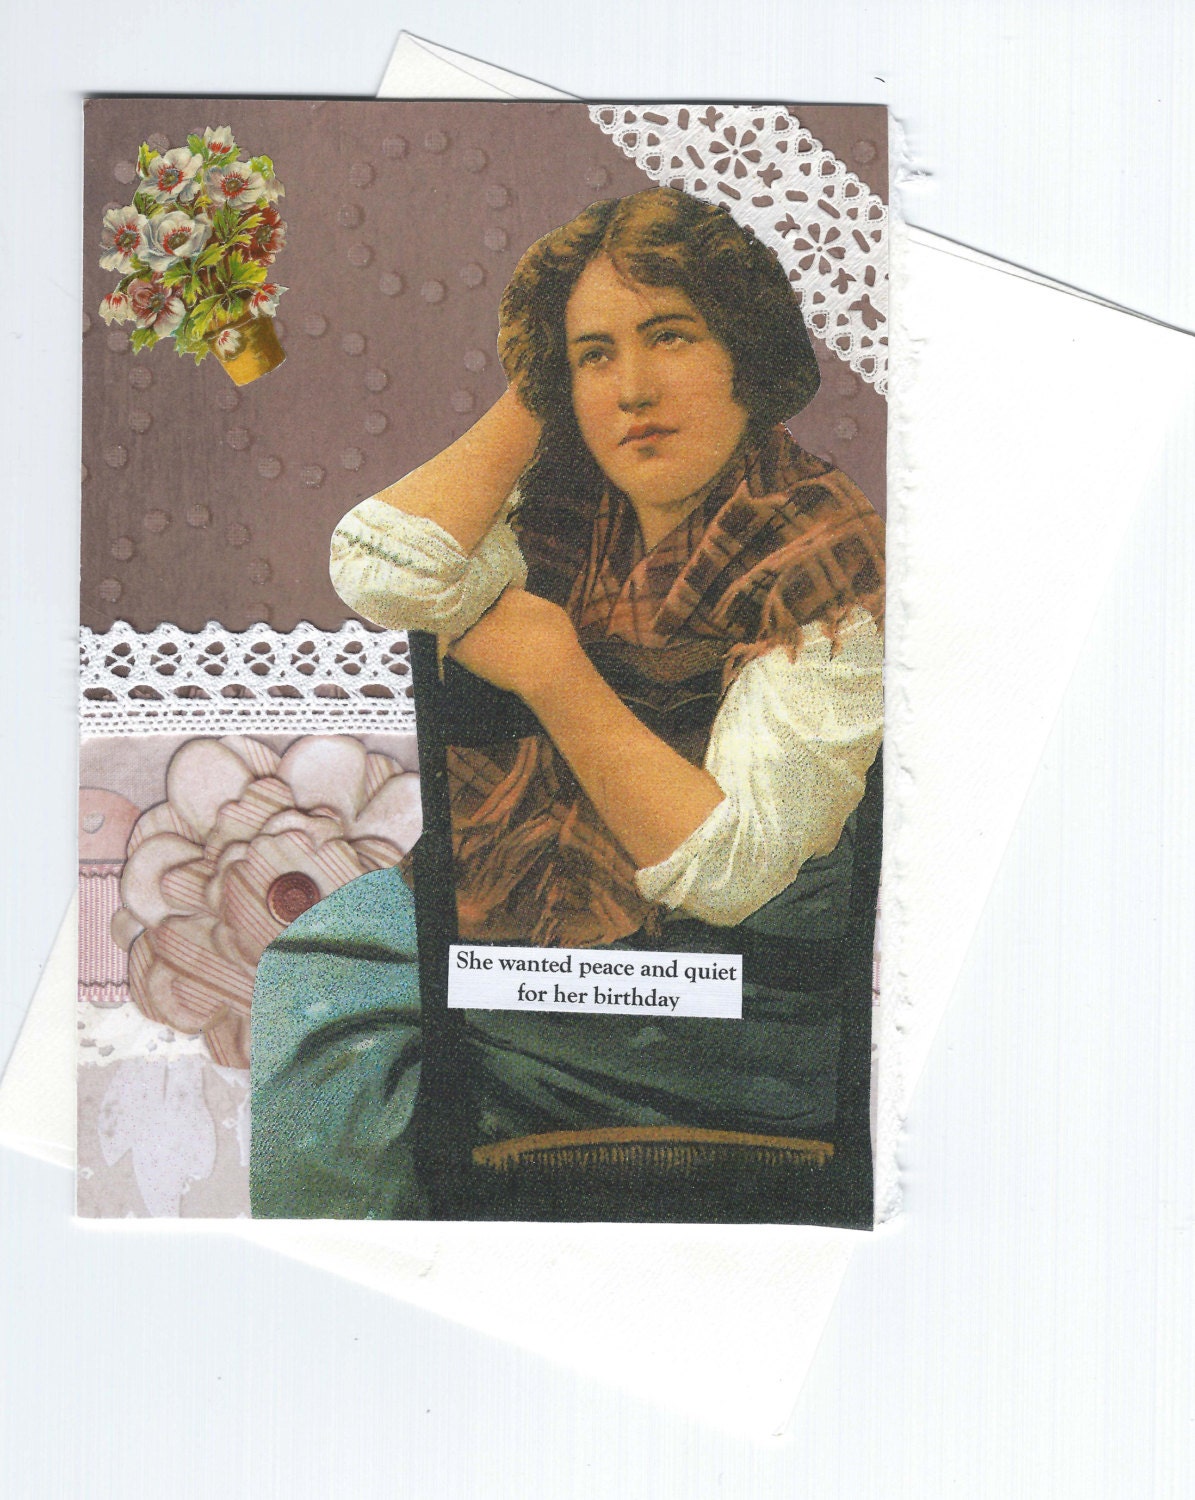 Plaintive Birthday Card With Victorian Woman Mocha Brown and Pink Collage Art - Gimme Some Peace - rhodyart